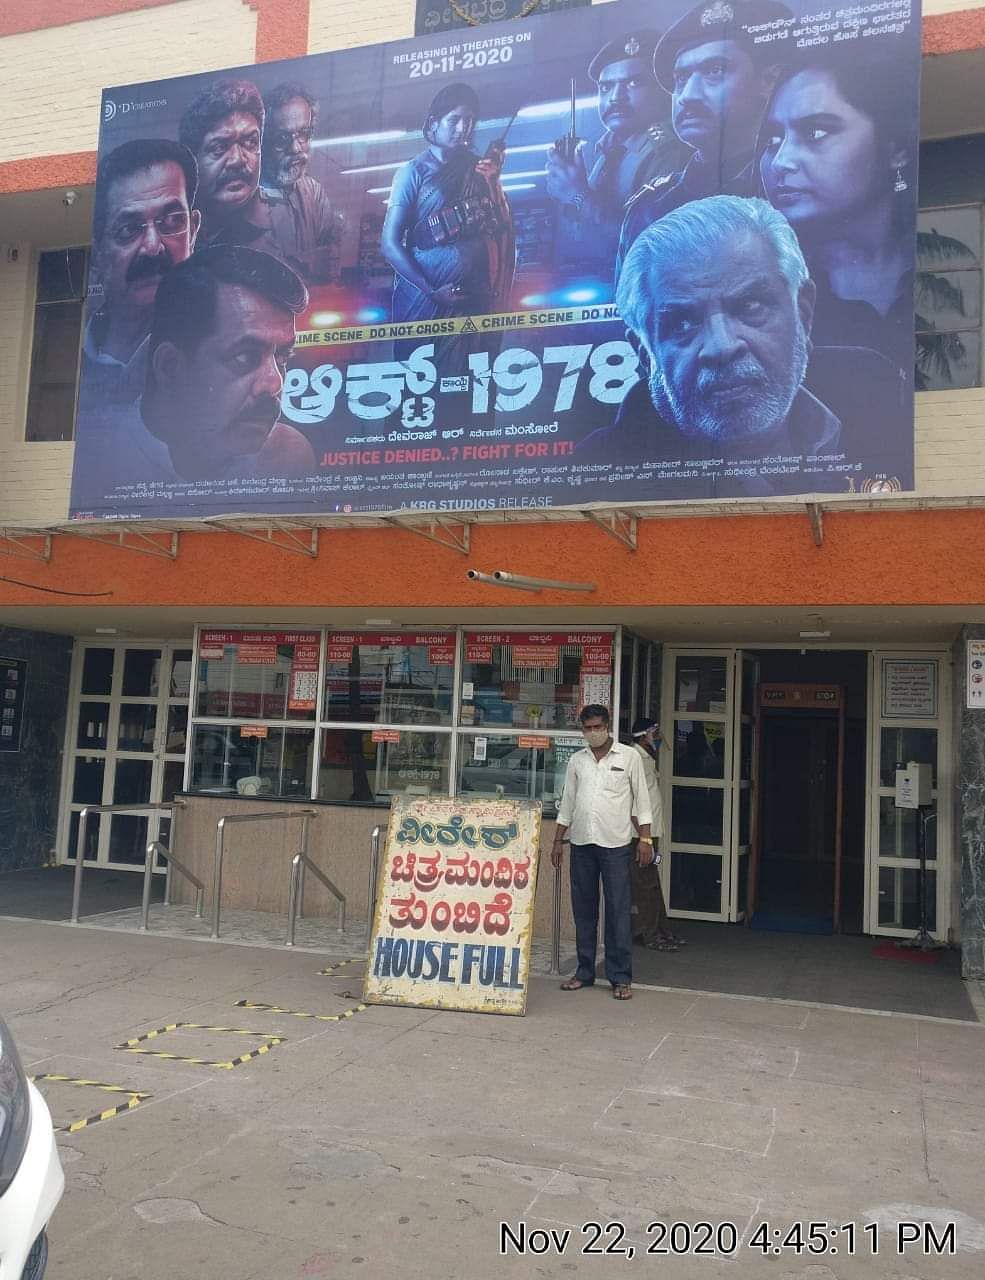 All seats at Veeresh theatre in Bengaluru, screening ‘Act 1978’, were taken for some shows last week. The news cheered the Kannada film industry. Twitter/ @mansore25